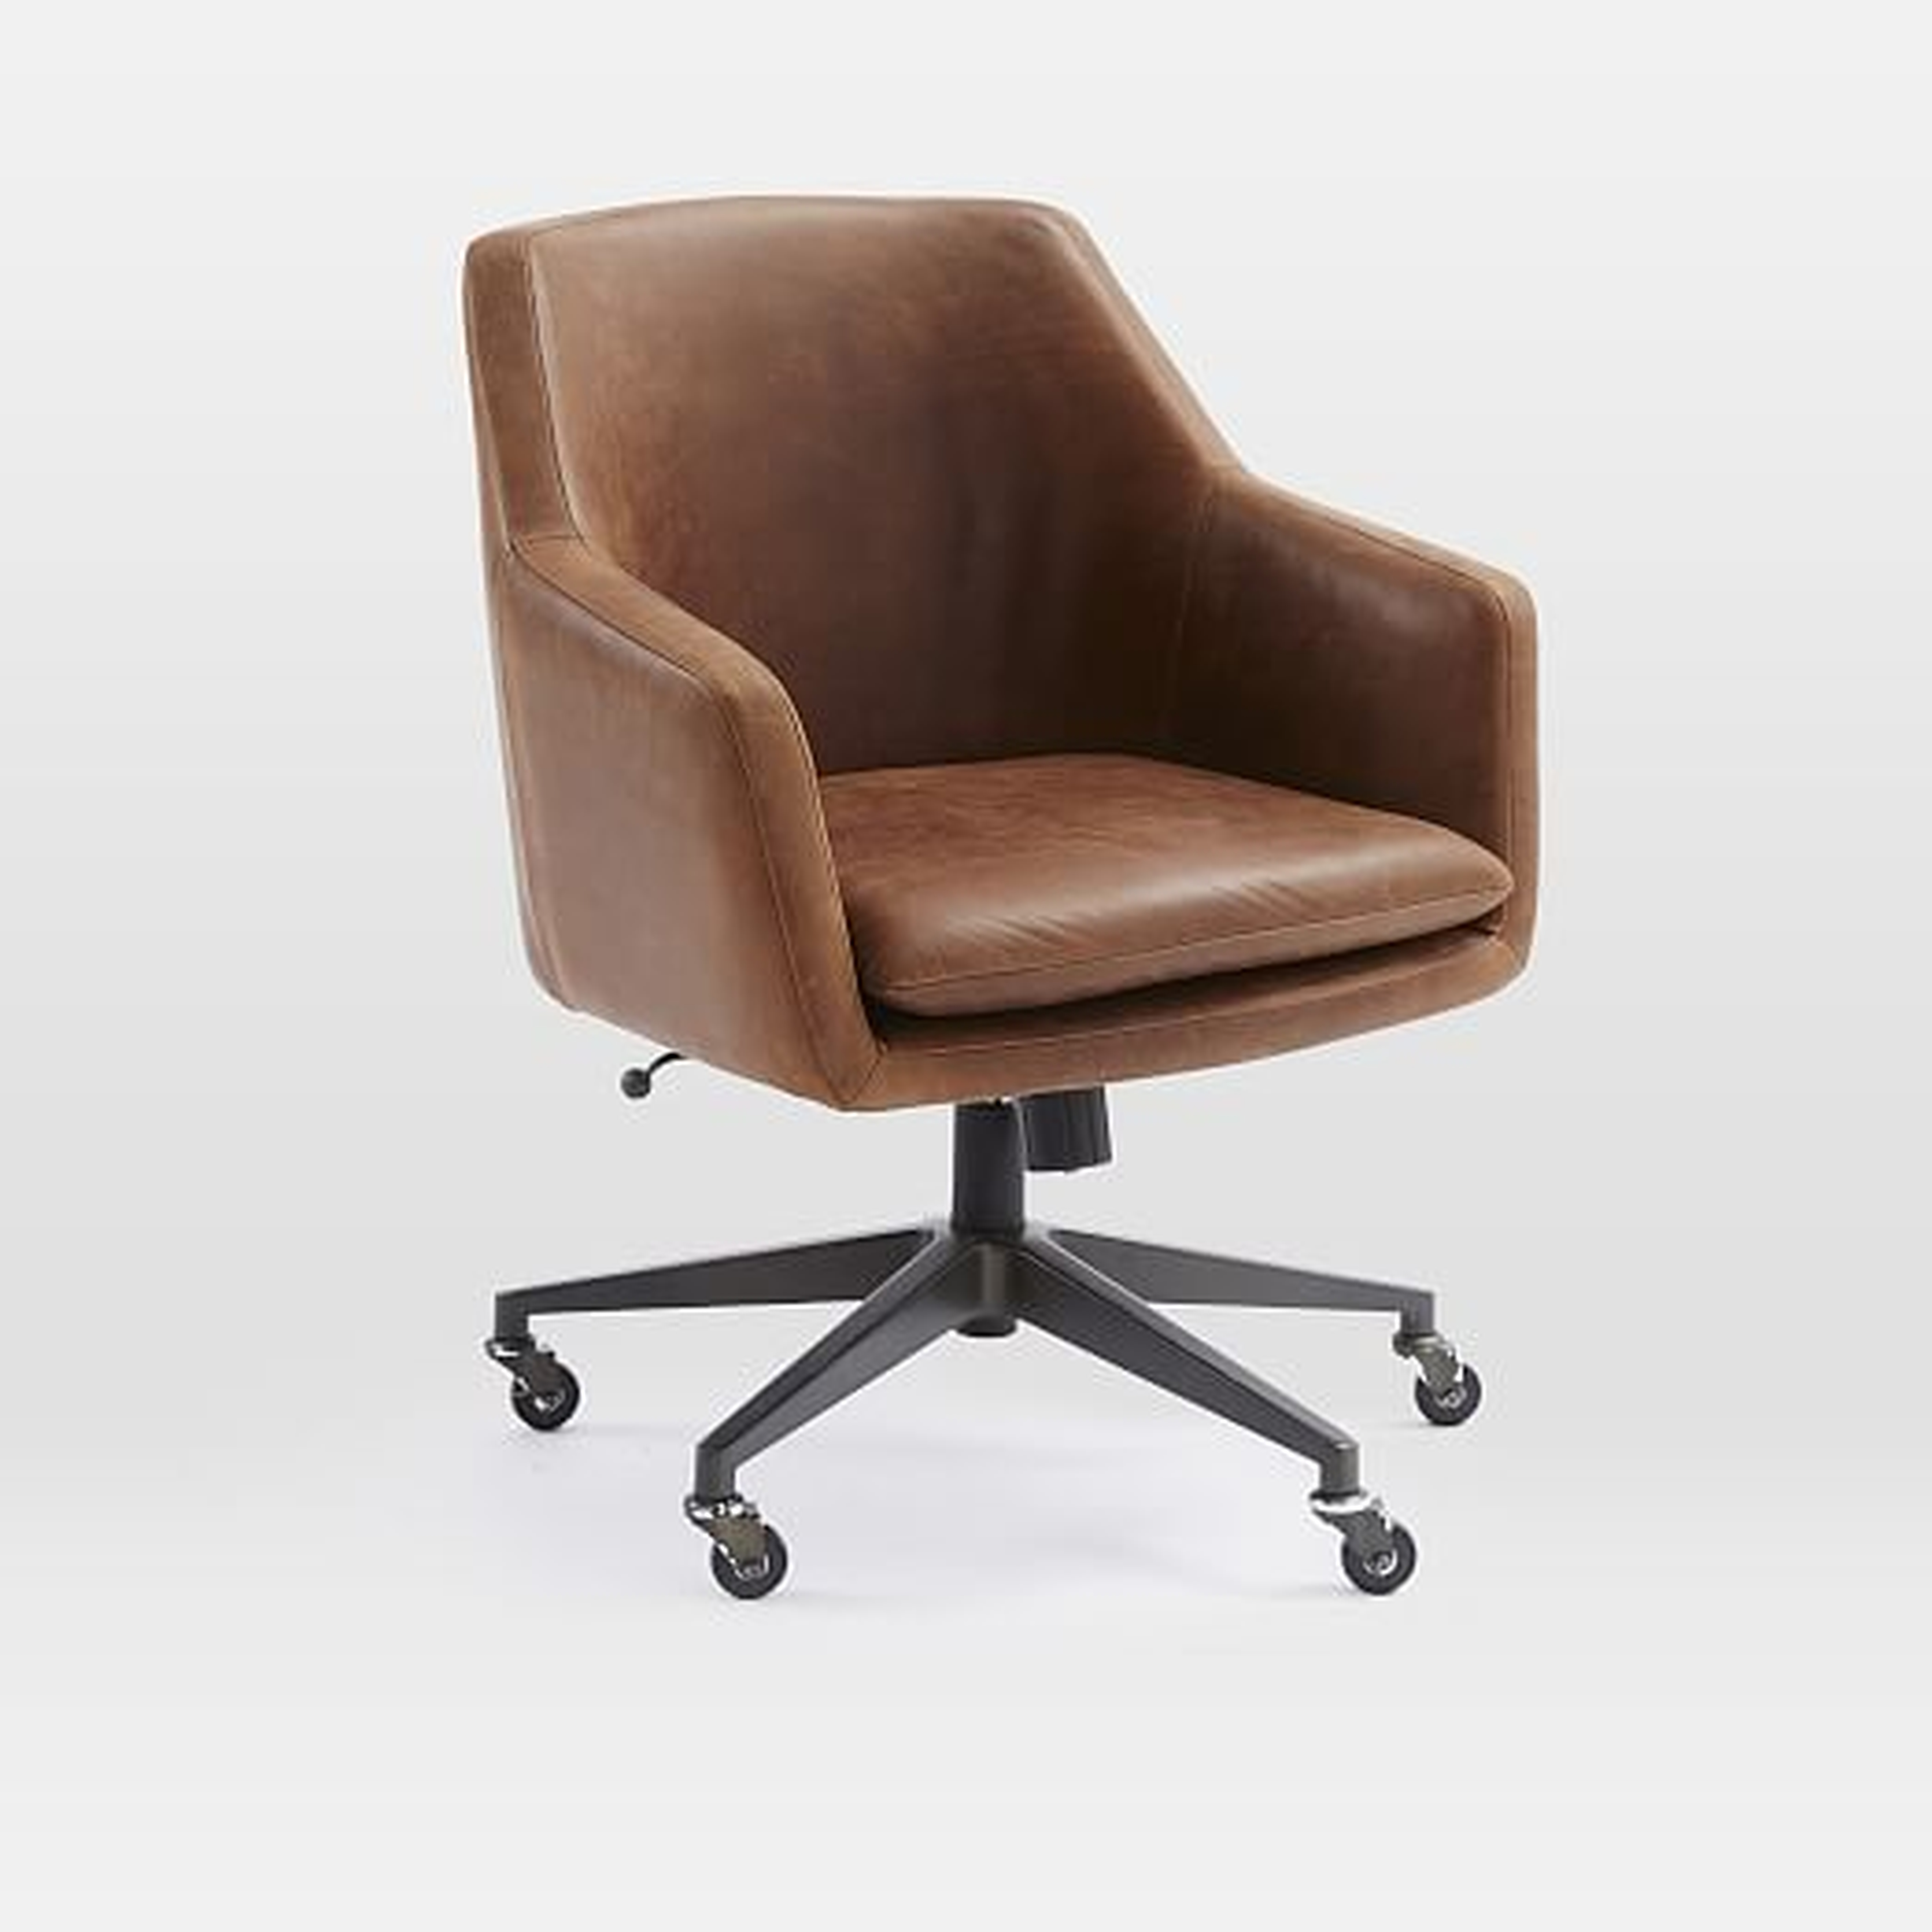 Helvetica Leather Office Chair-Molasses - West Elm